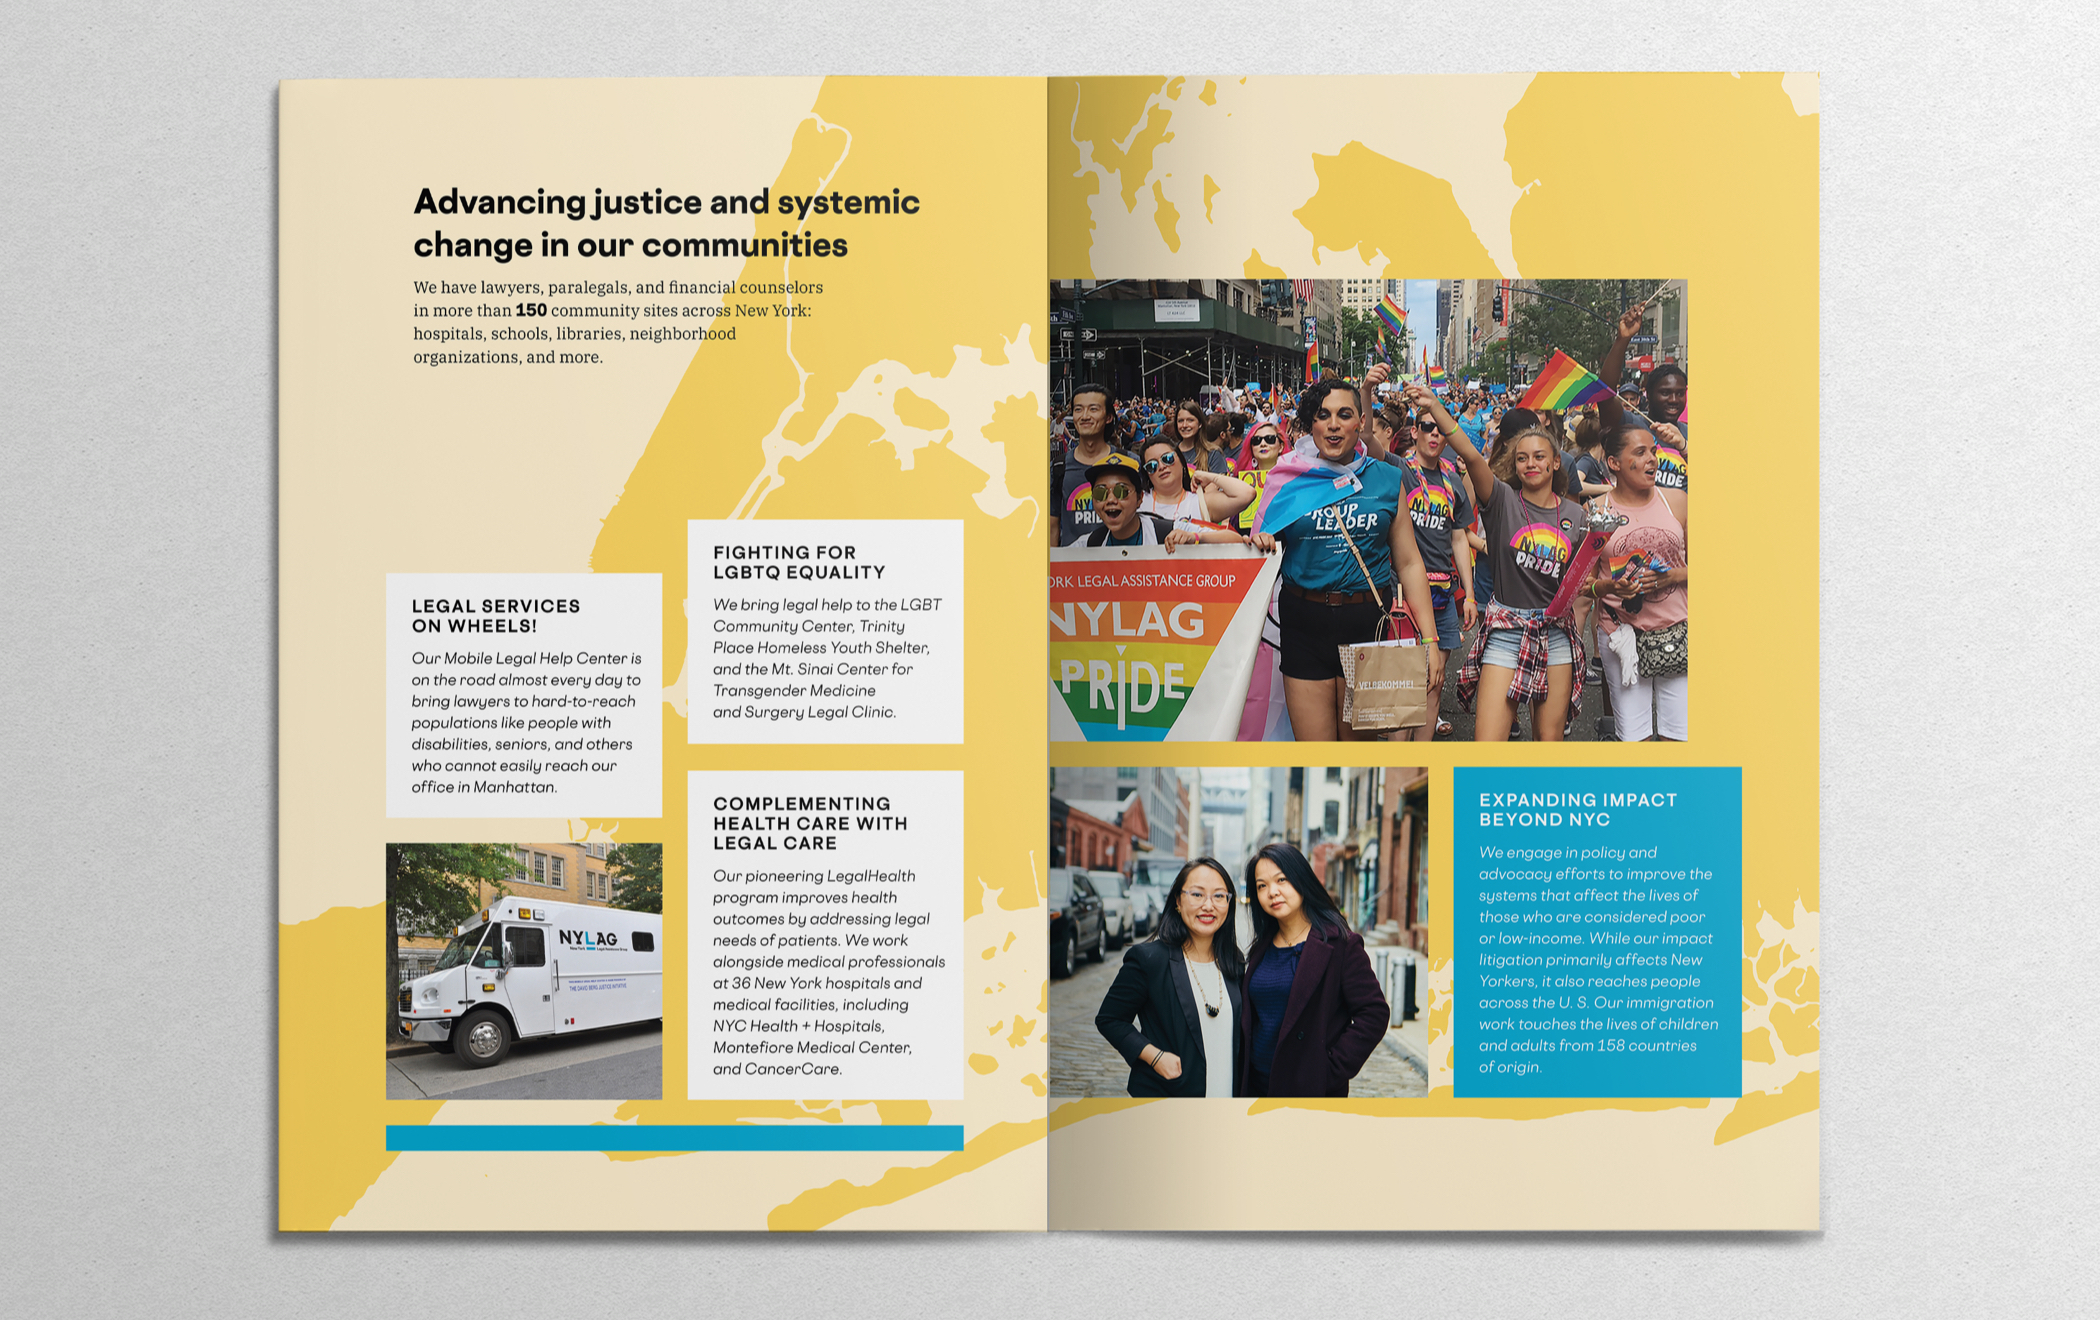 Pages of New York Legal Assistance Group brochure with title "Advancing justice and systemic change in our communities."